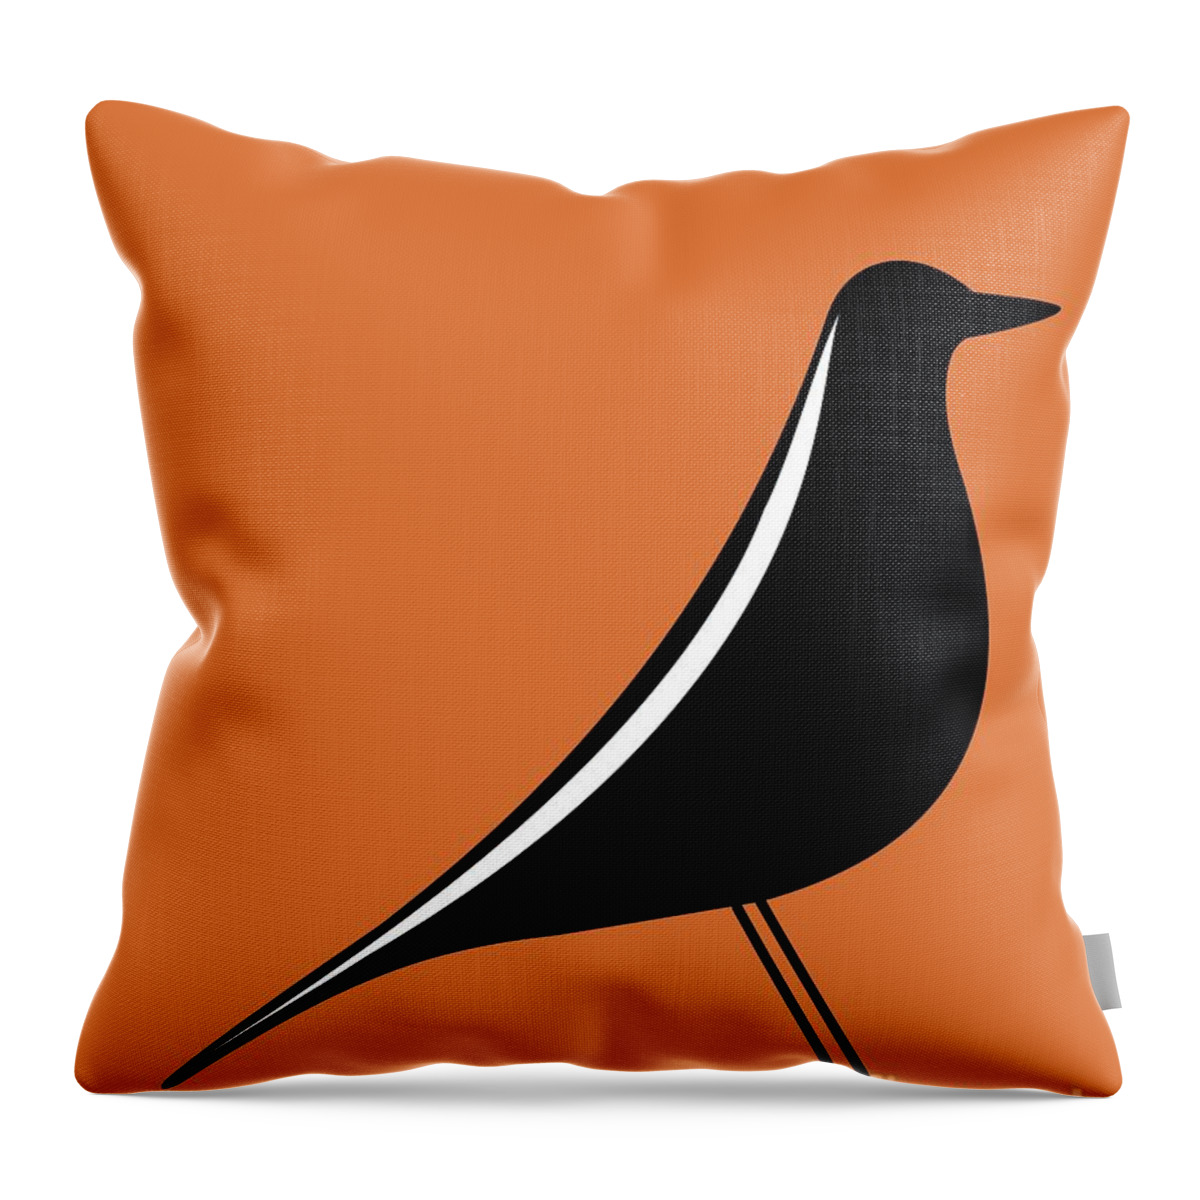 Mid Century Modern Throw Pillow featuring the digital art Eames House Bird on Orange by Donna Mibus